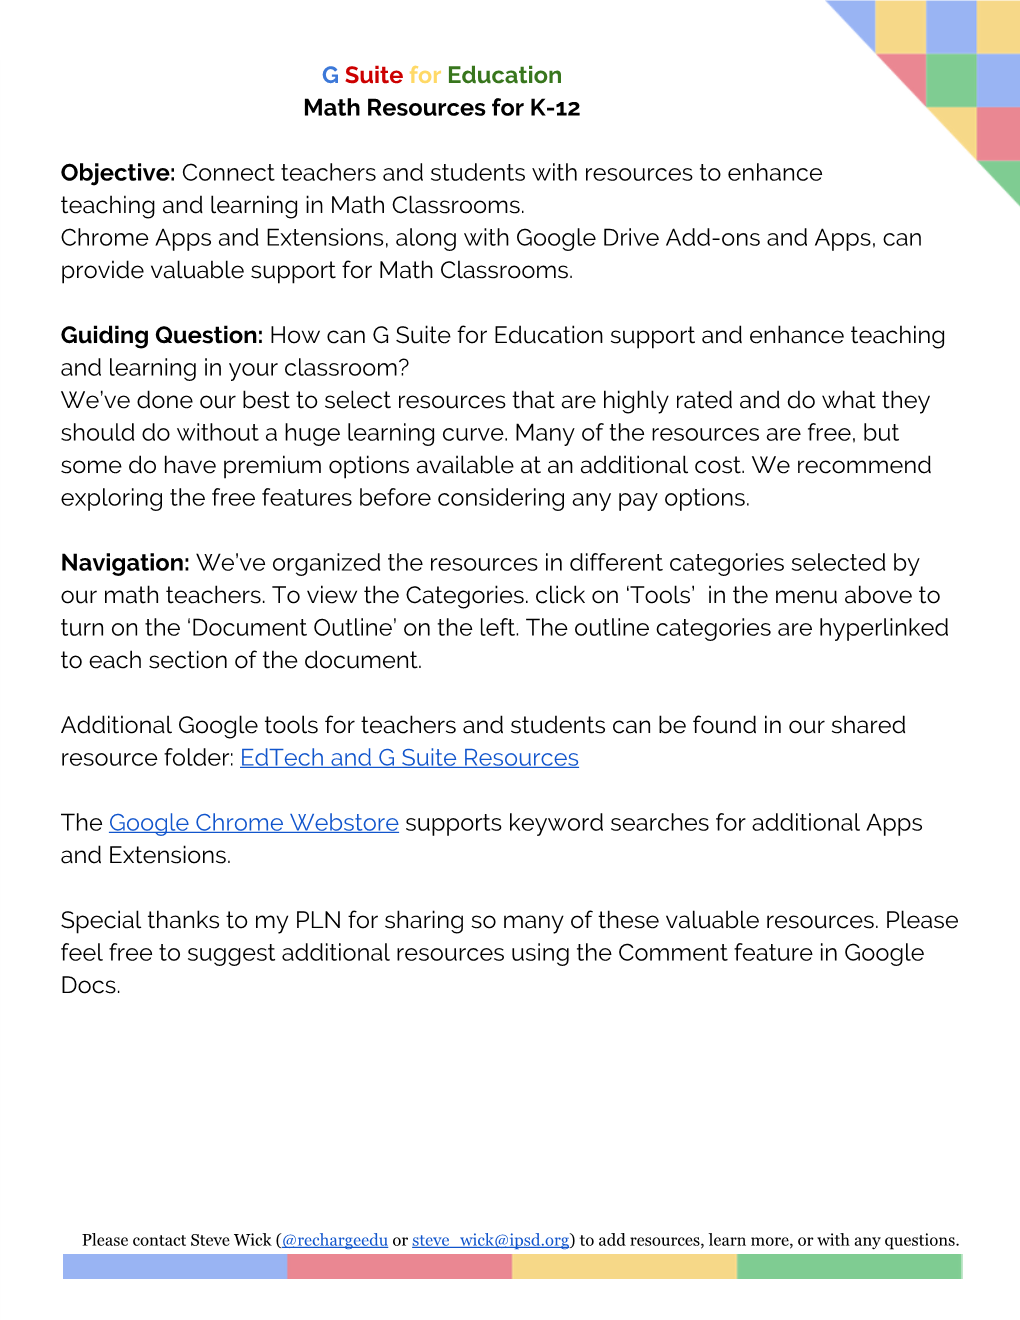 G​ ​Suite​ ​For​ ​Education Math Resources for K-12 Objective:​Connect Teachers and Students with Resources To